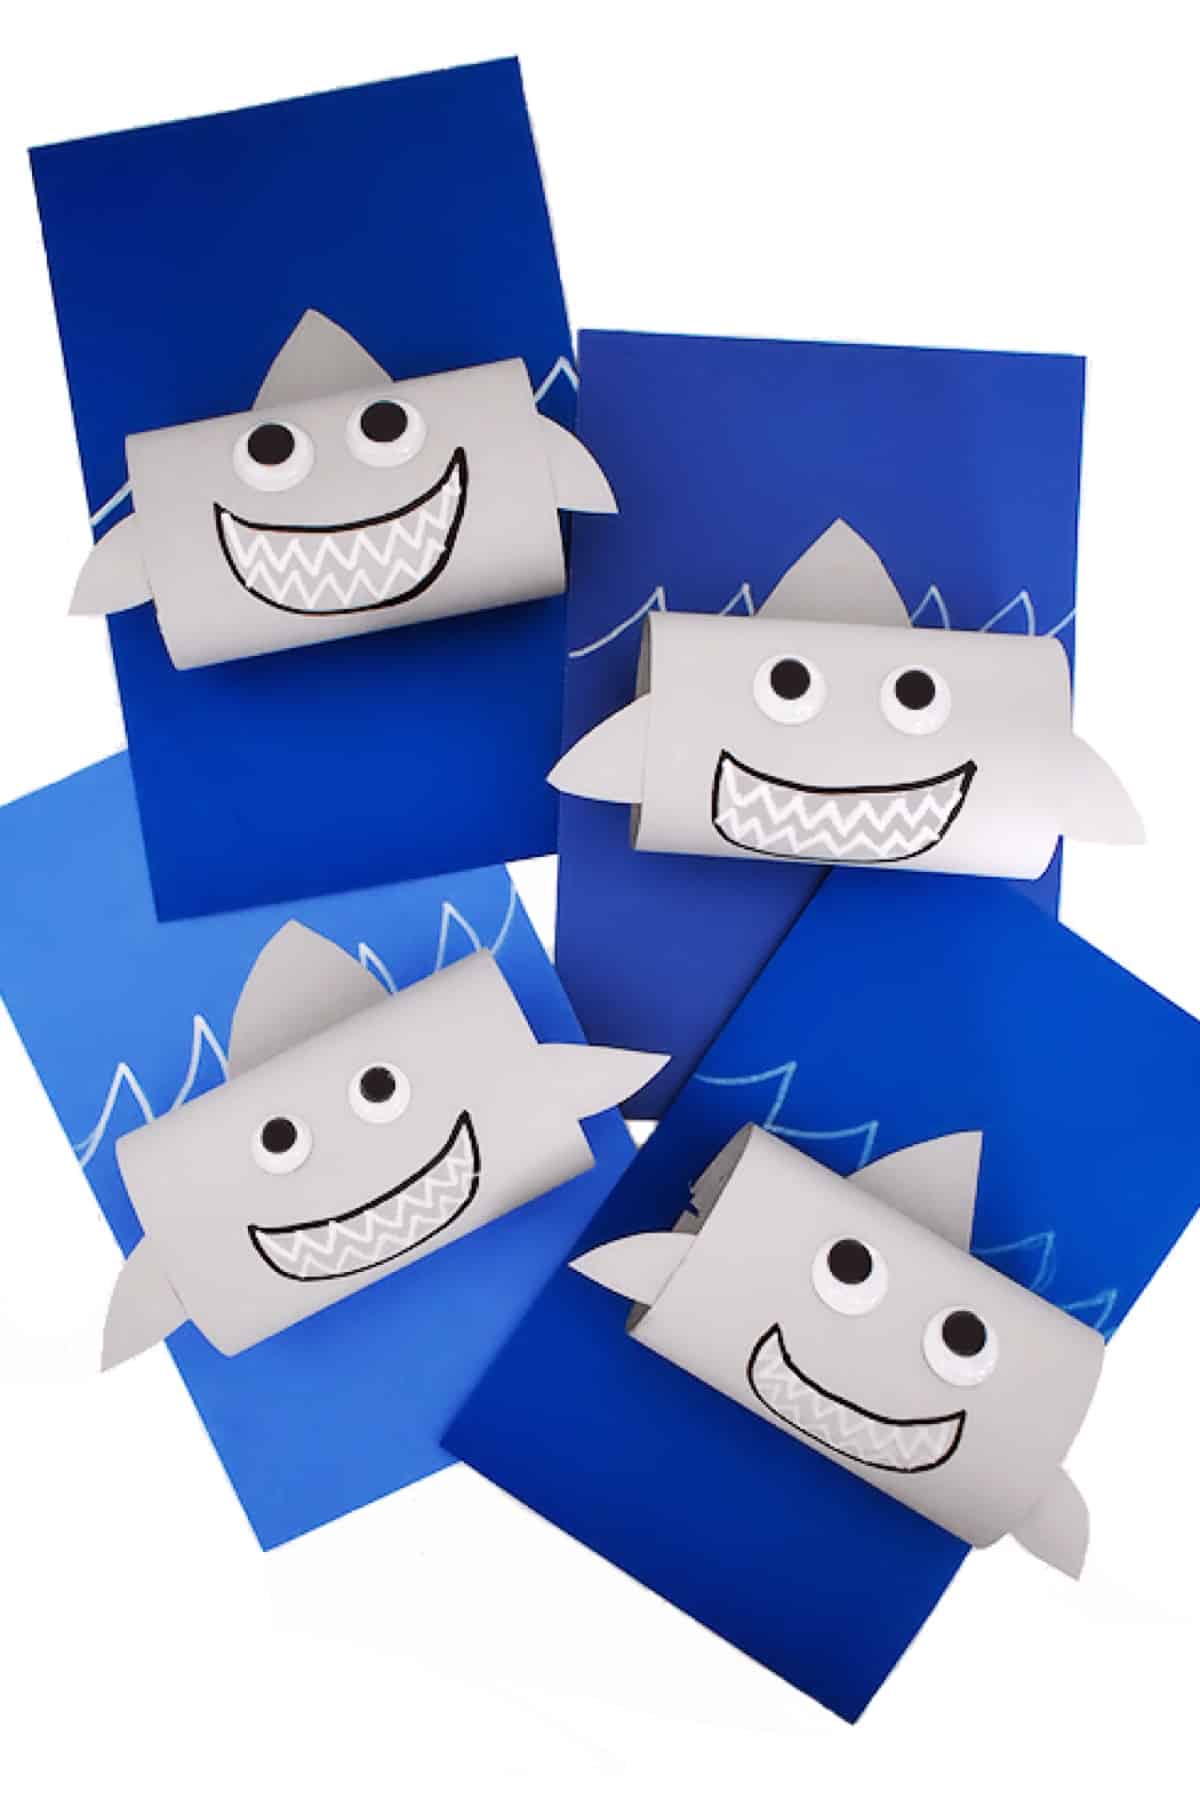 shark craft made with paper